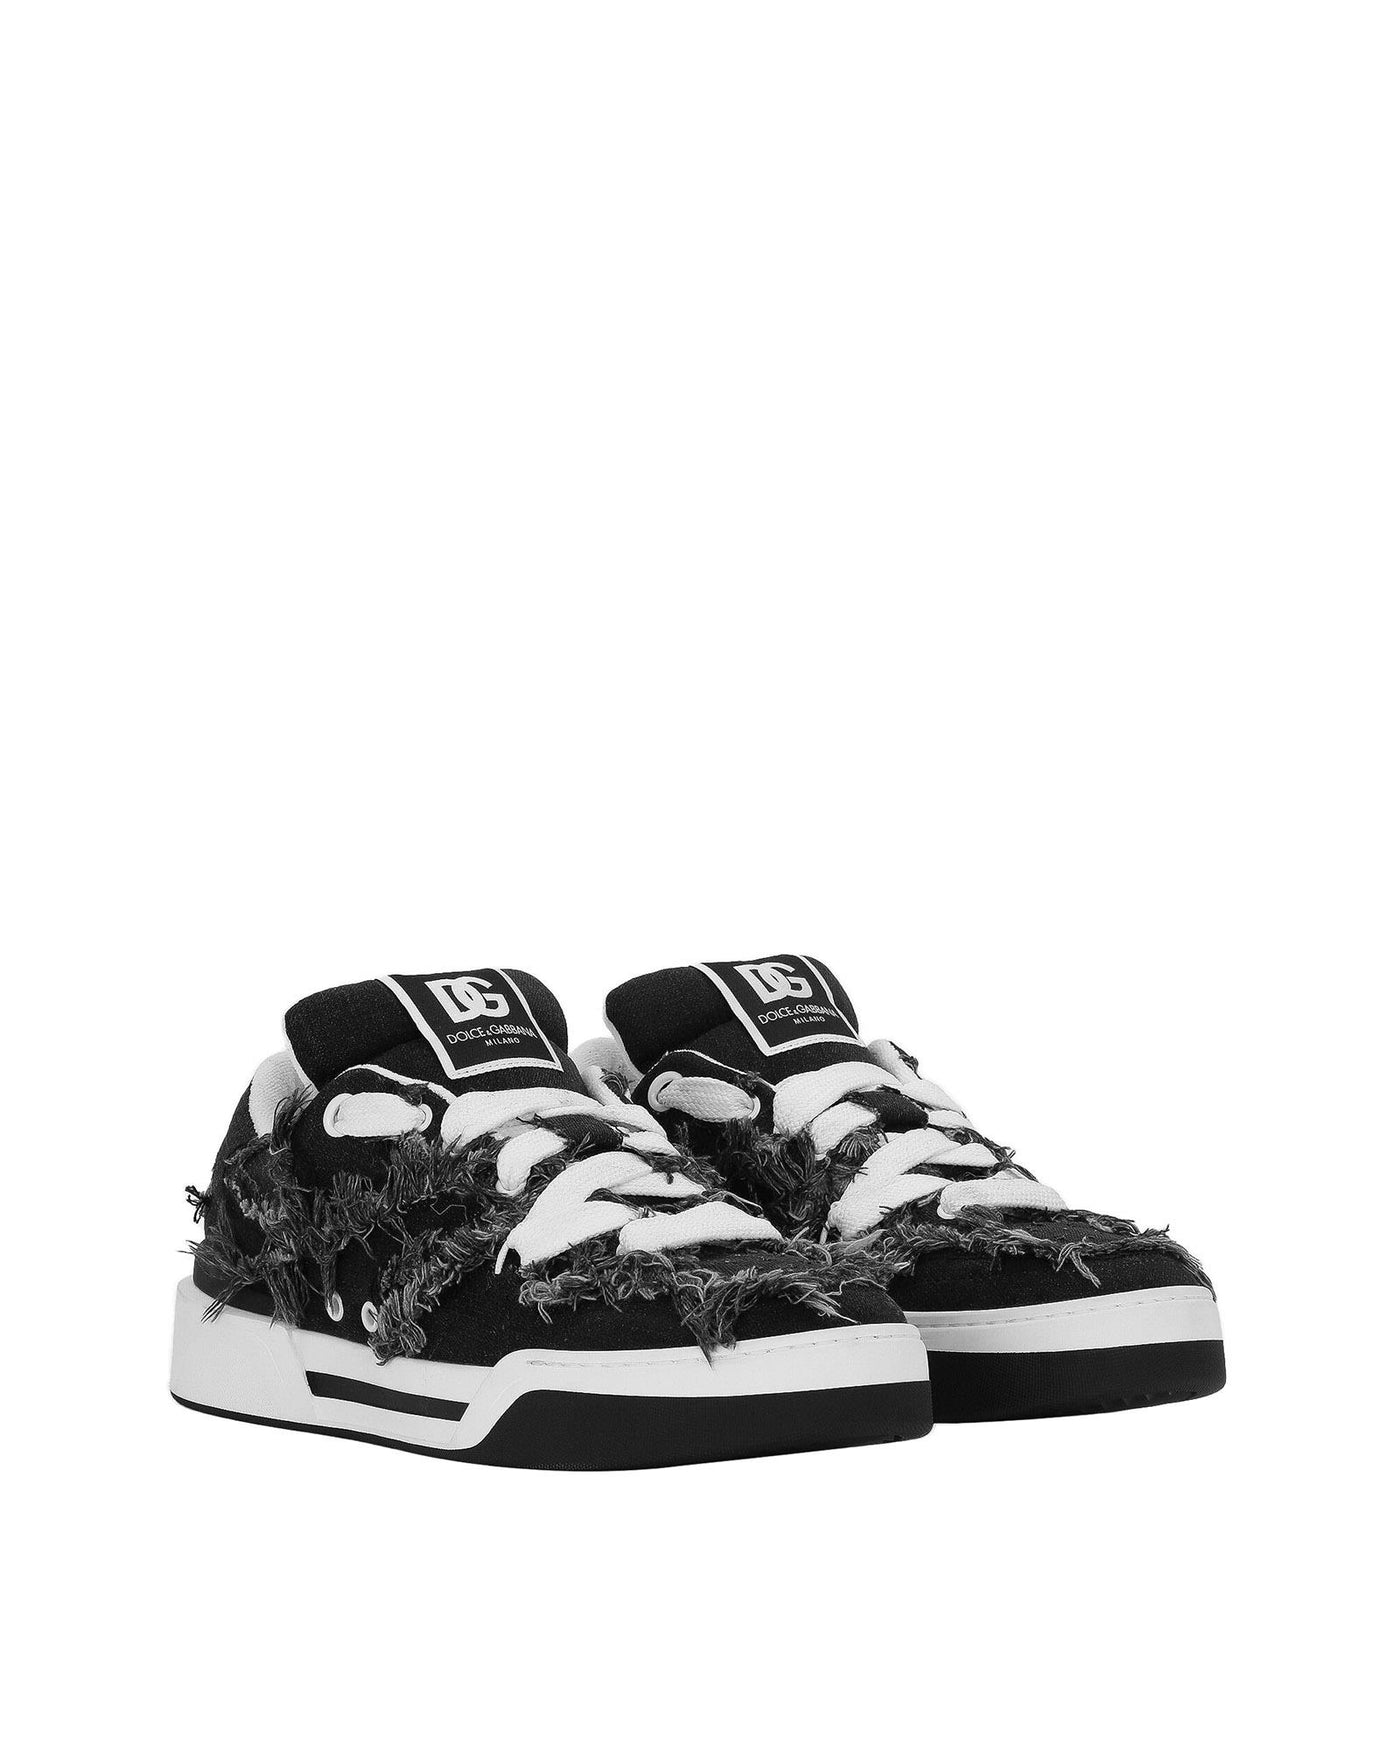 DOLCE&GABBANA NEW ROMA SNEAKERS